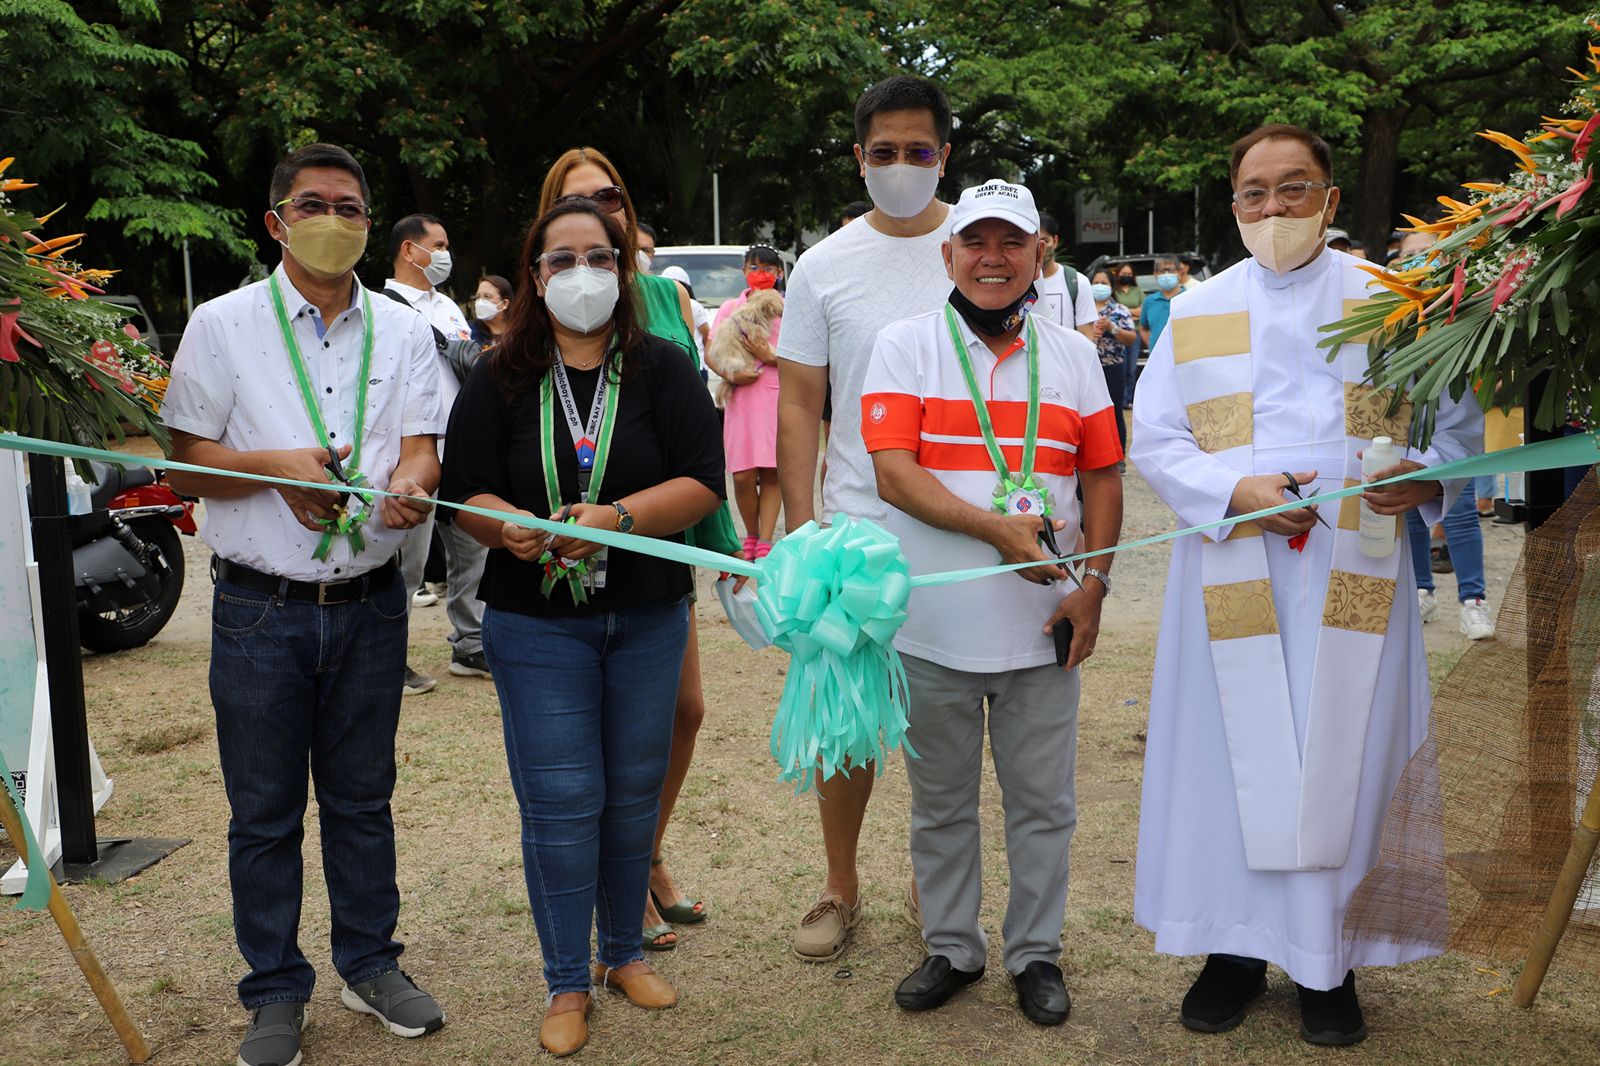 Subic Bay Metropolitan Authority (SBMA) Chairman Rolen C. Paulino (3 rd from left) leads the ribbon-cutting ceremony to formally open the Weekend Eco Market at the San Roque chapel grounds. With him is OIC-Provincial Director of the Department of Trade and Industry (DTI) Zambales Enrique Tacbad (left), SBMA Tourism manager Jem Camba (2 nd from left), and Fr. Jose Manuel Montes (right).